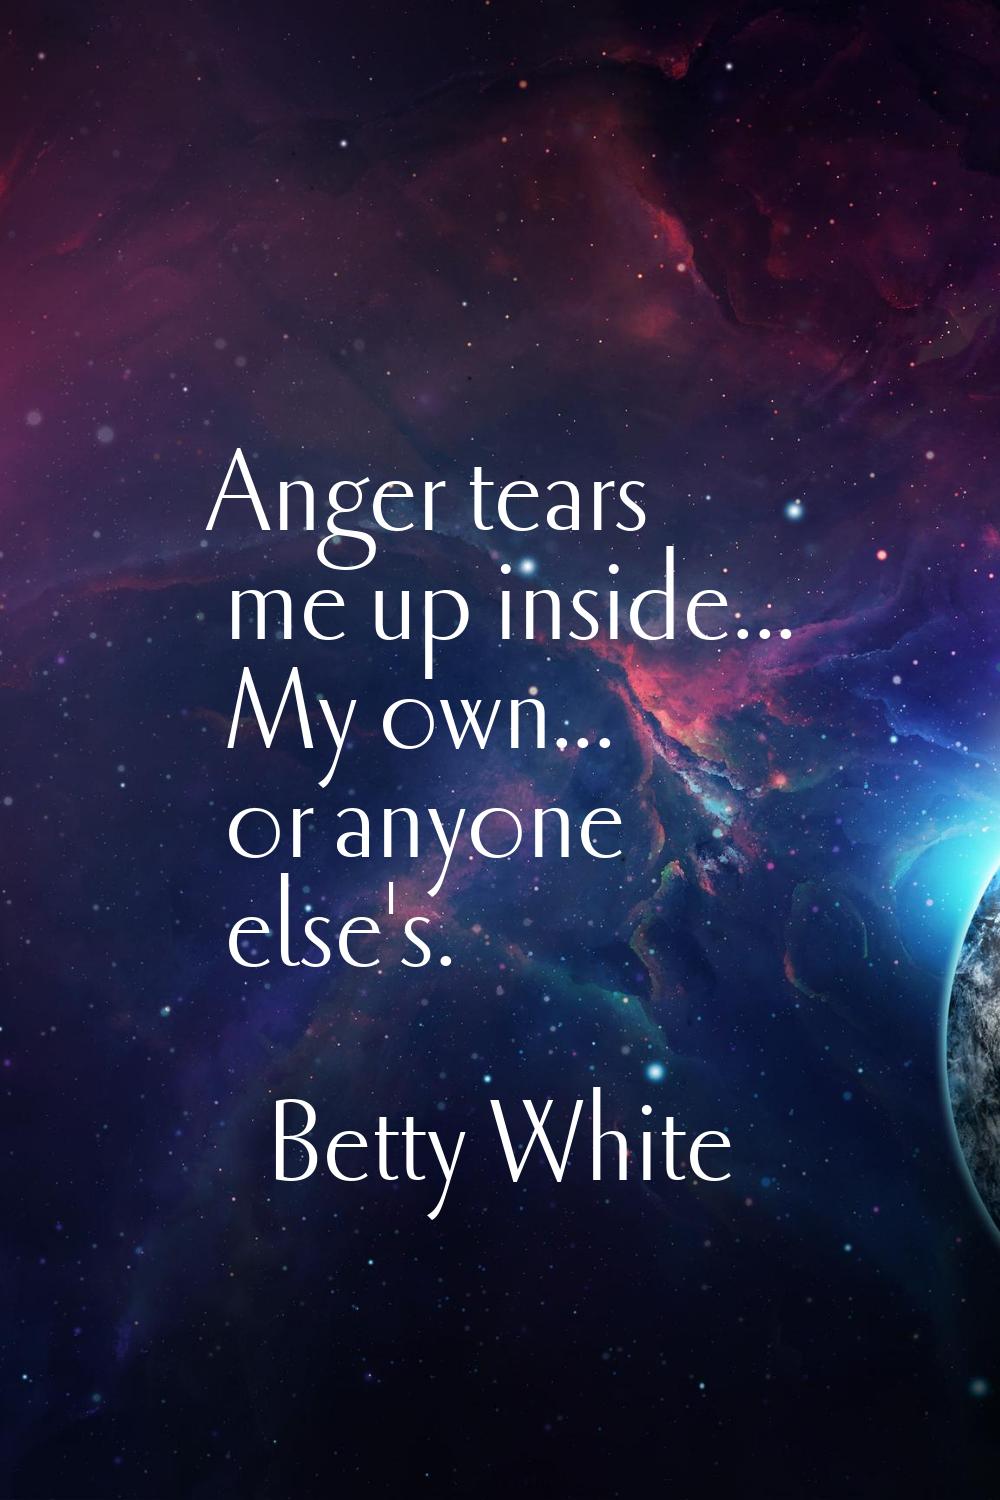 Anger tears me up inside... My own... or anyone else's.